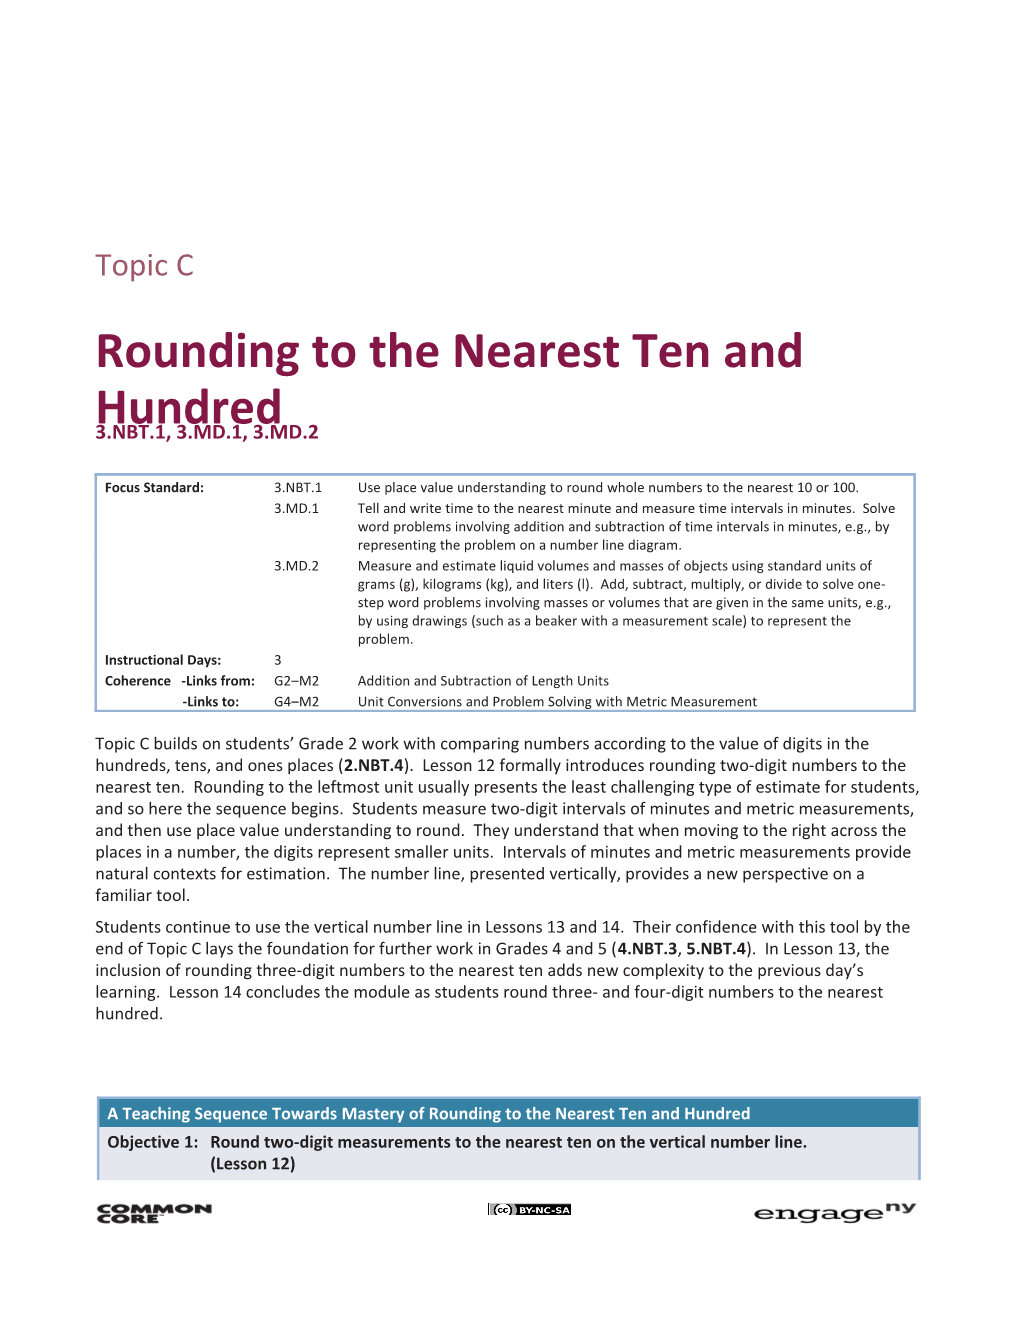 Rounding to the Nearest Ten and Hundred